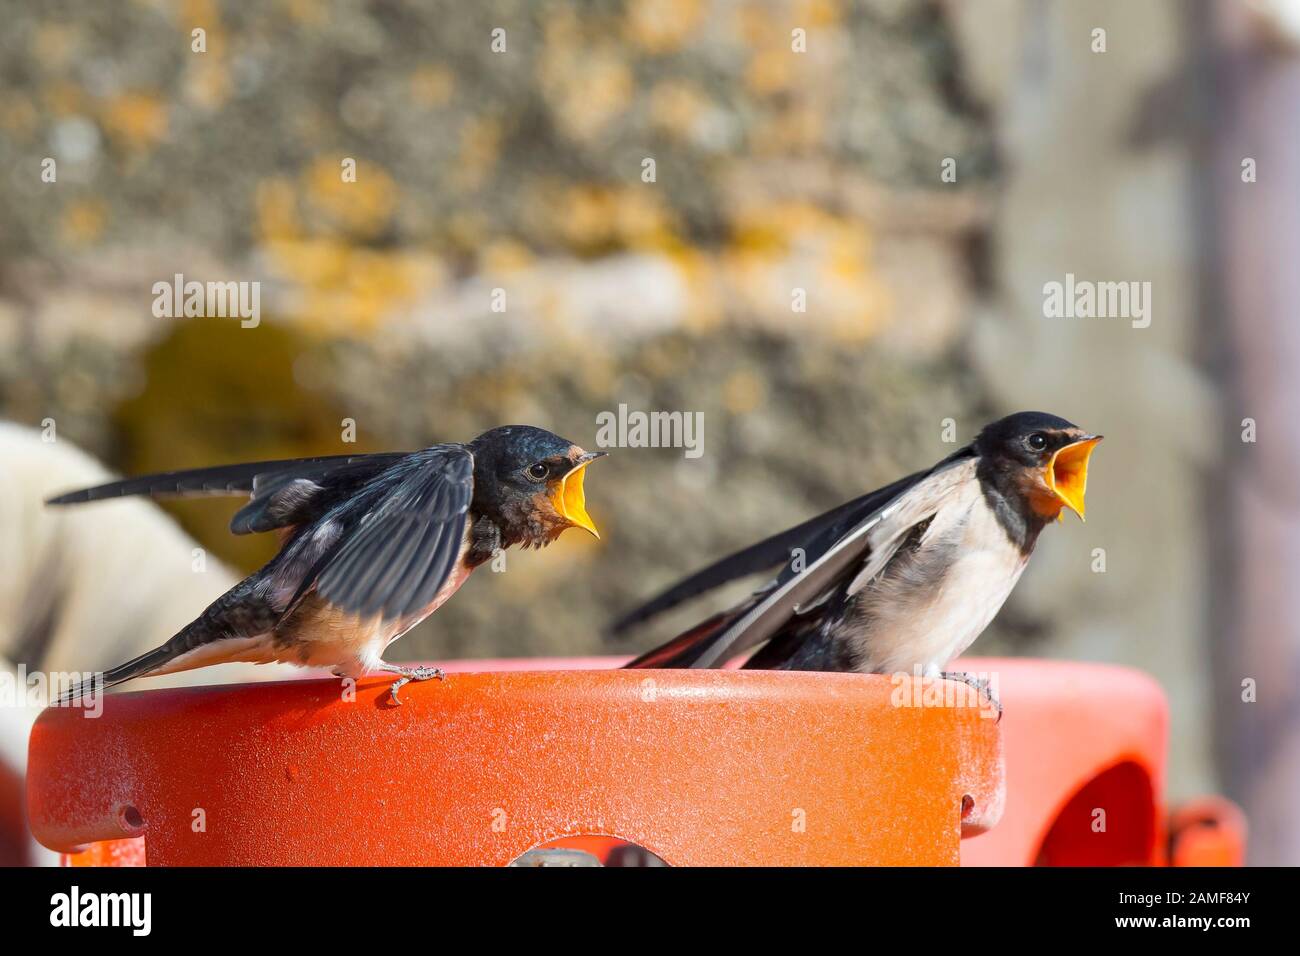 Close up of UK barn swallow chicks (Hirundo rustica) isolated outdoors in summer farmyard, flapping wings & beaks open calling. Hungry baby birds. Stock Photo